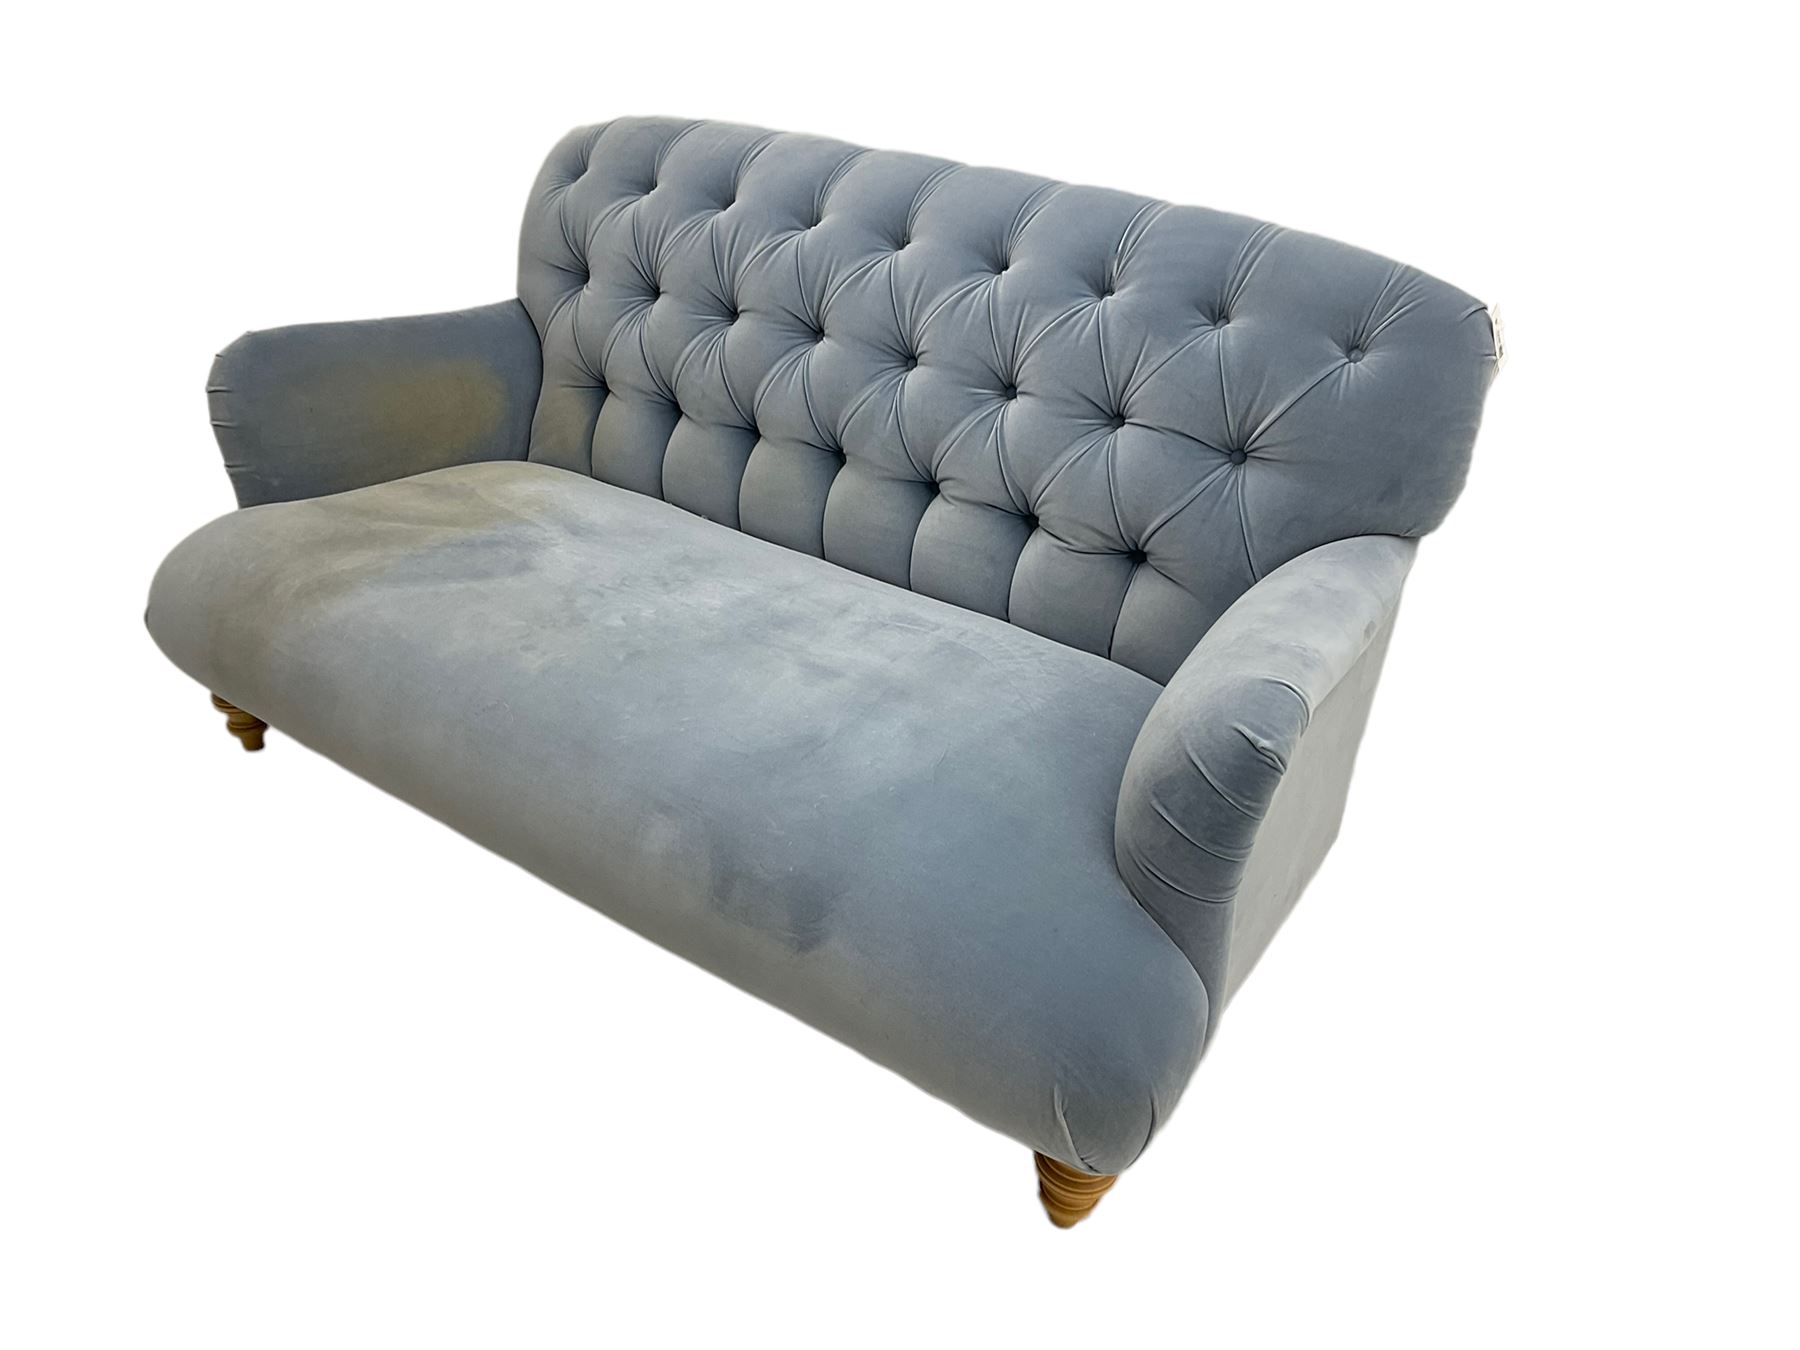 Tetrad - two seat sofa upholstered in baby blue buttoned fabric - Image 5 of 6